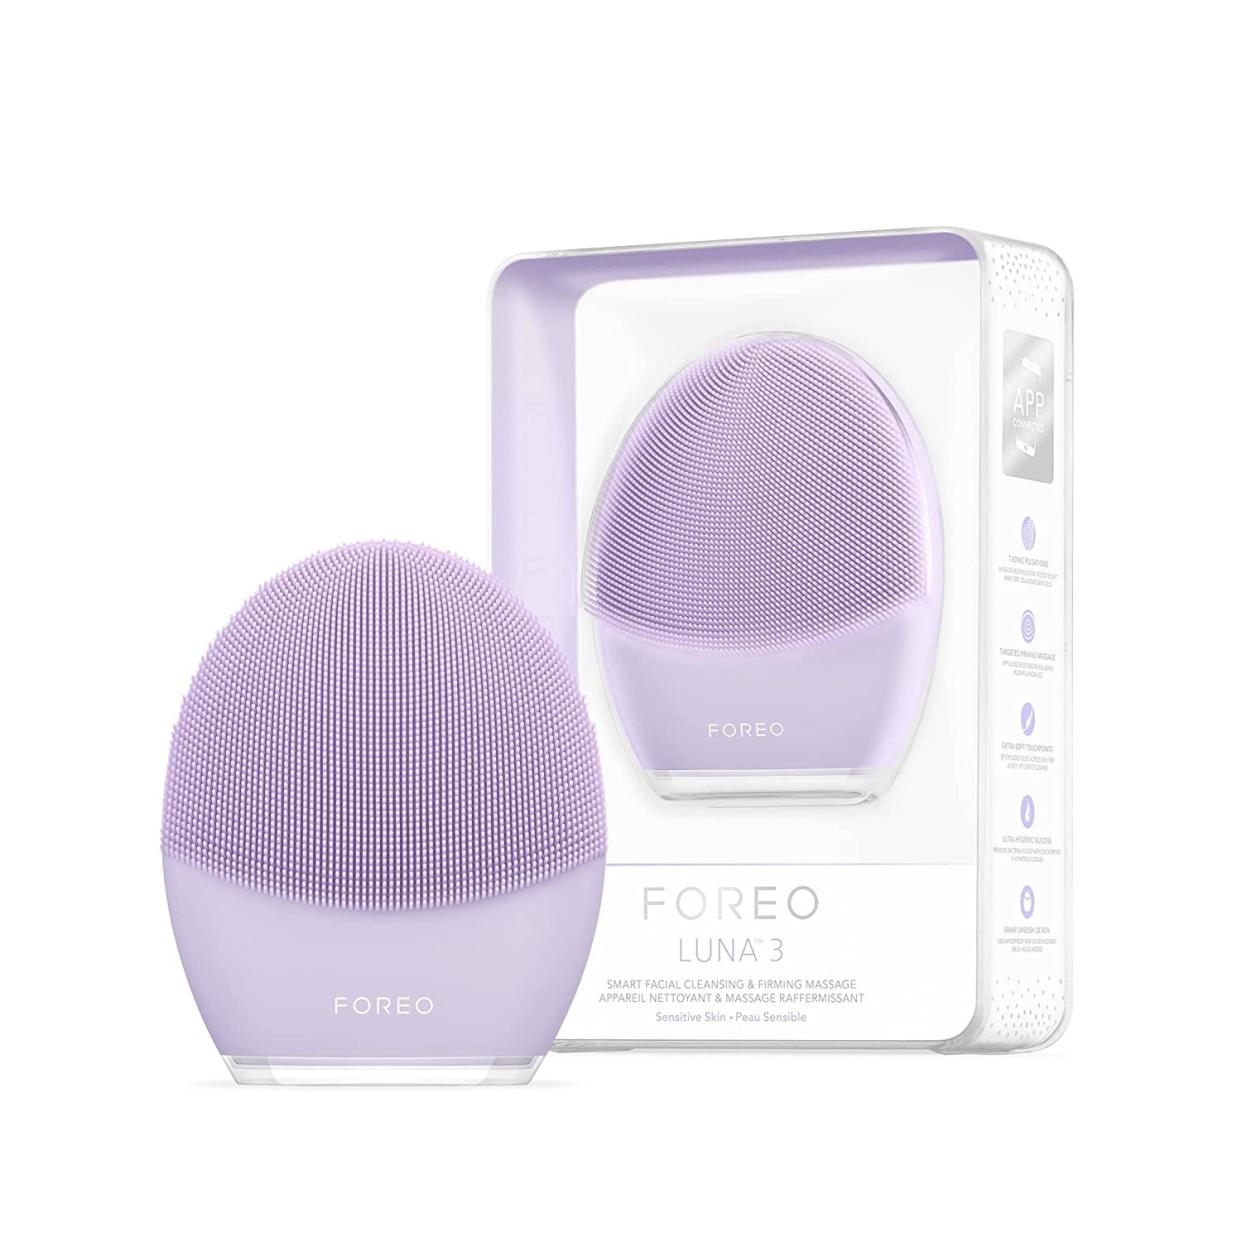 Foreo Luna 3 Smart Silicone Facial Cleansing and Firming Massage Brush